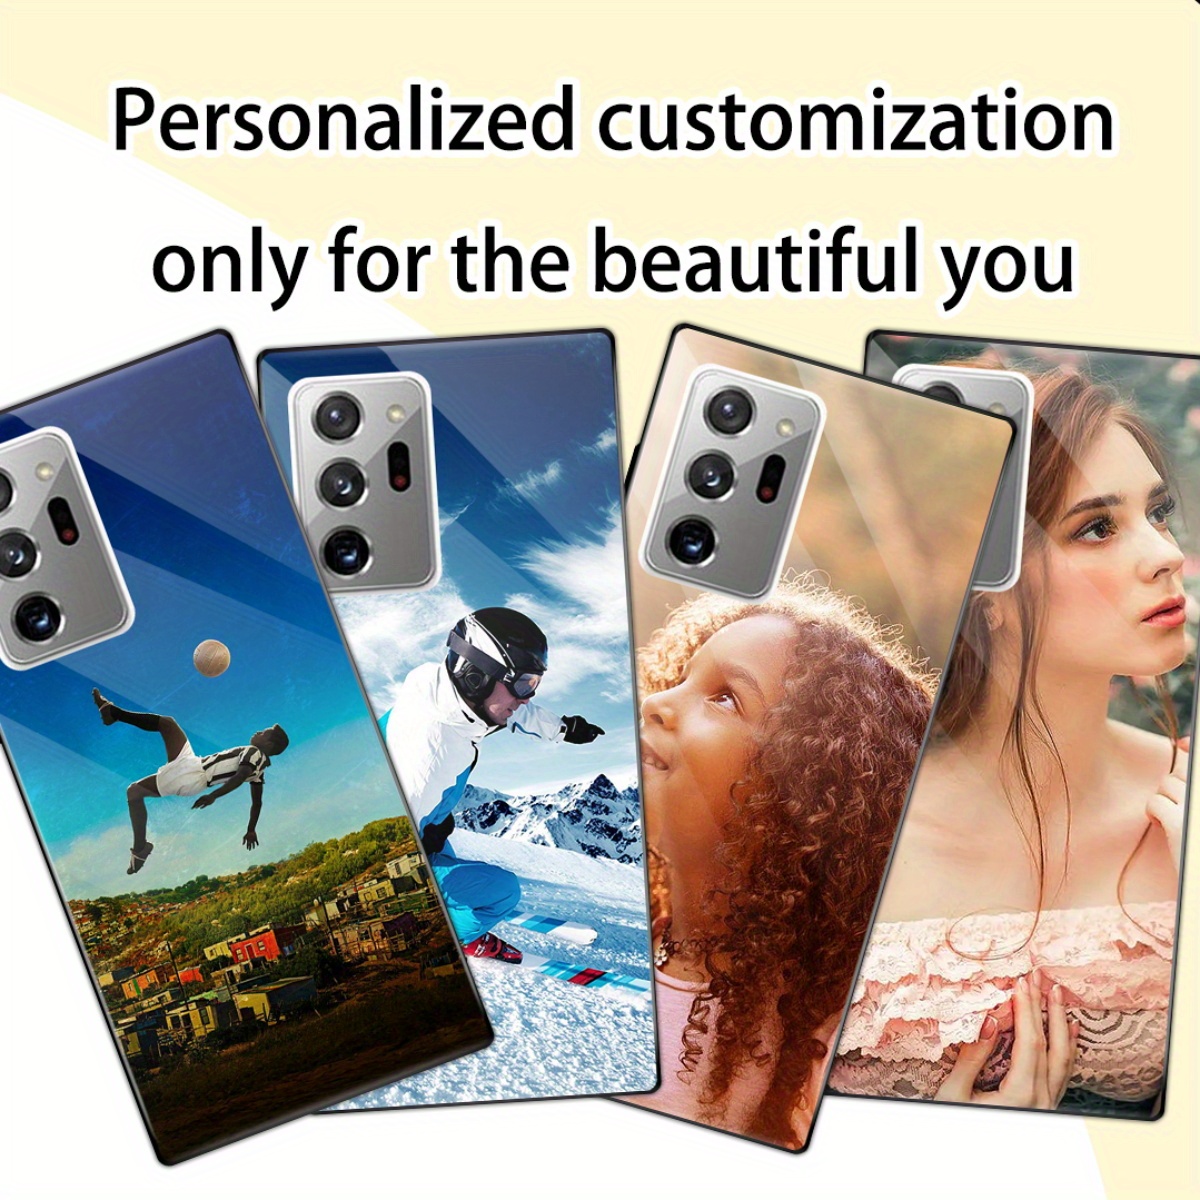 

Customizable Phone Case For Samsung /note10 Pro/note10 Lite/note9, Diy Personalized Photo Pattern Glass+tpu Protection Cover, Ideal For Birthday, Holiday, And Couples Gift